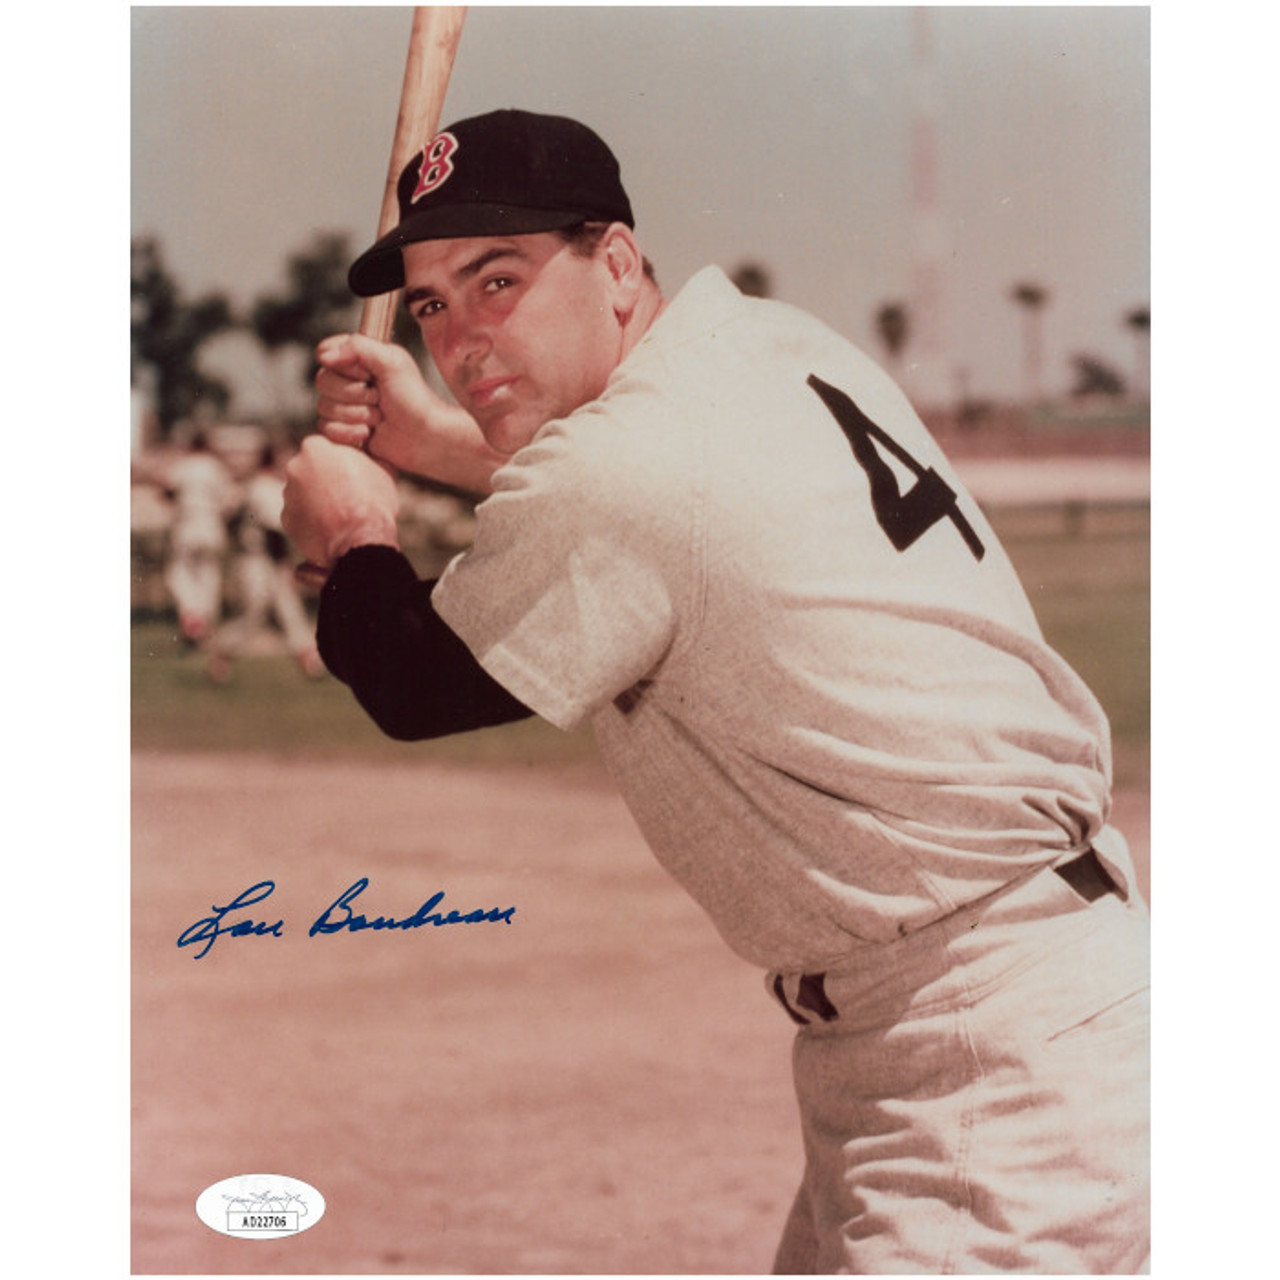 Pee Wee Reese Signed Photograph - JSA Certified 8x10